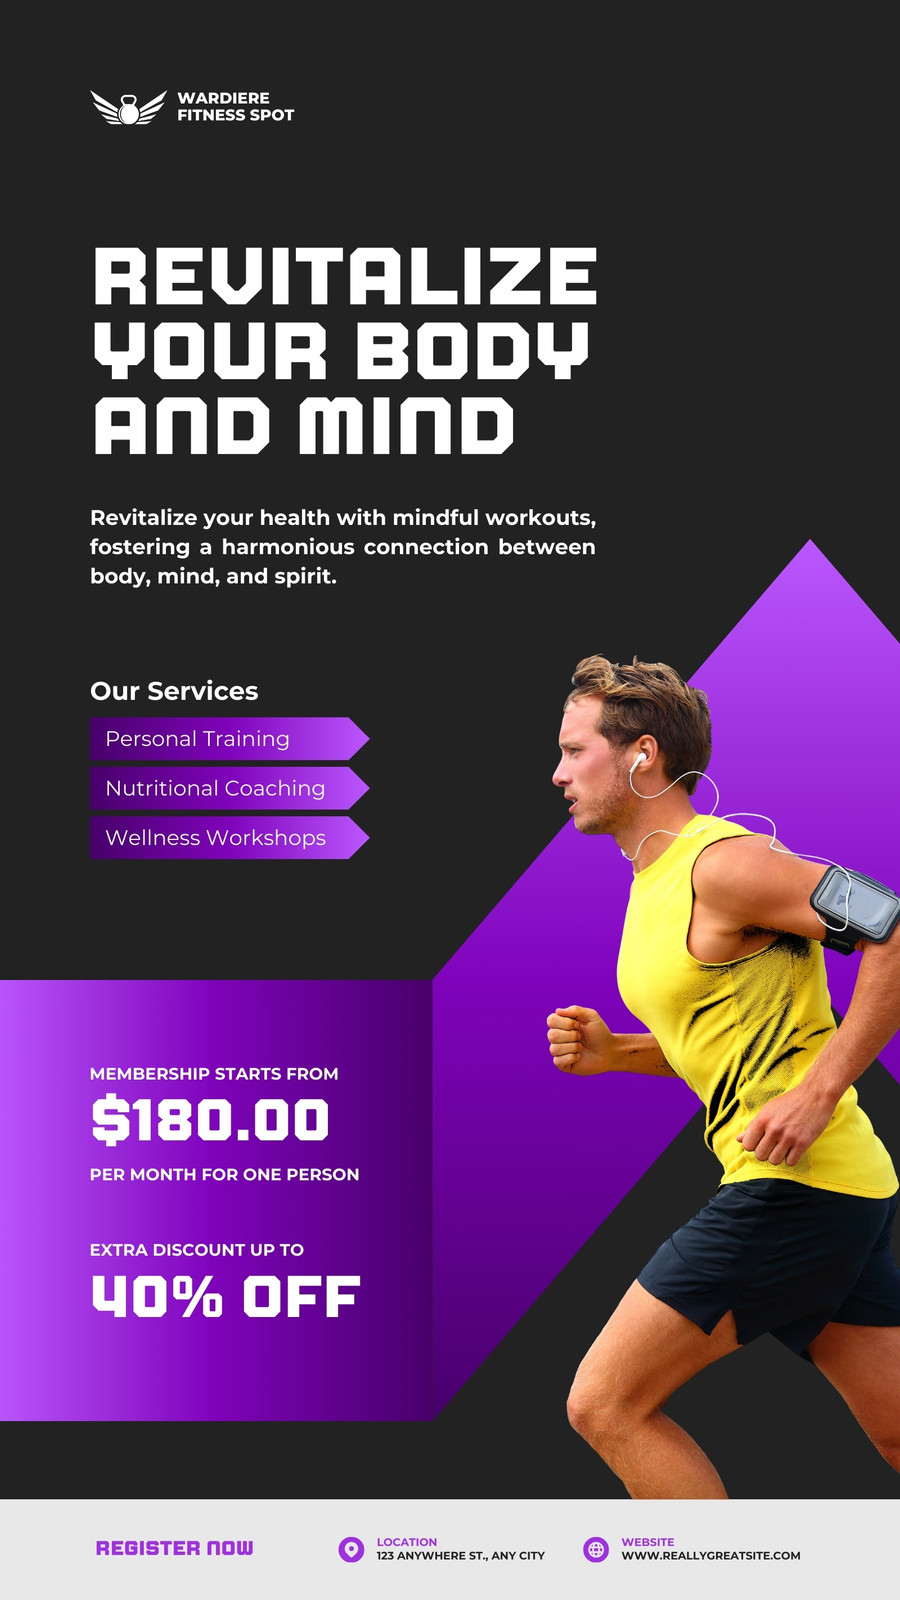 Simple Membership Price List, Services List Canva Templates for Gyms,  Crossfit Gym, Coaches, Yoga, Studio Fitness Business 